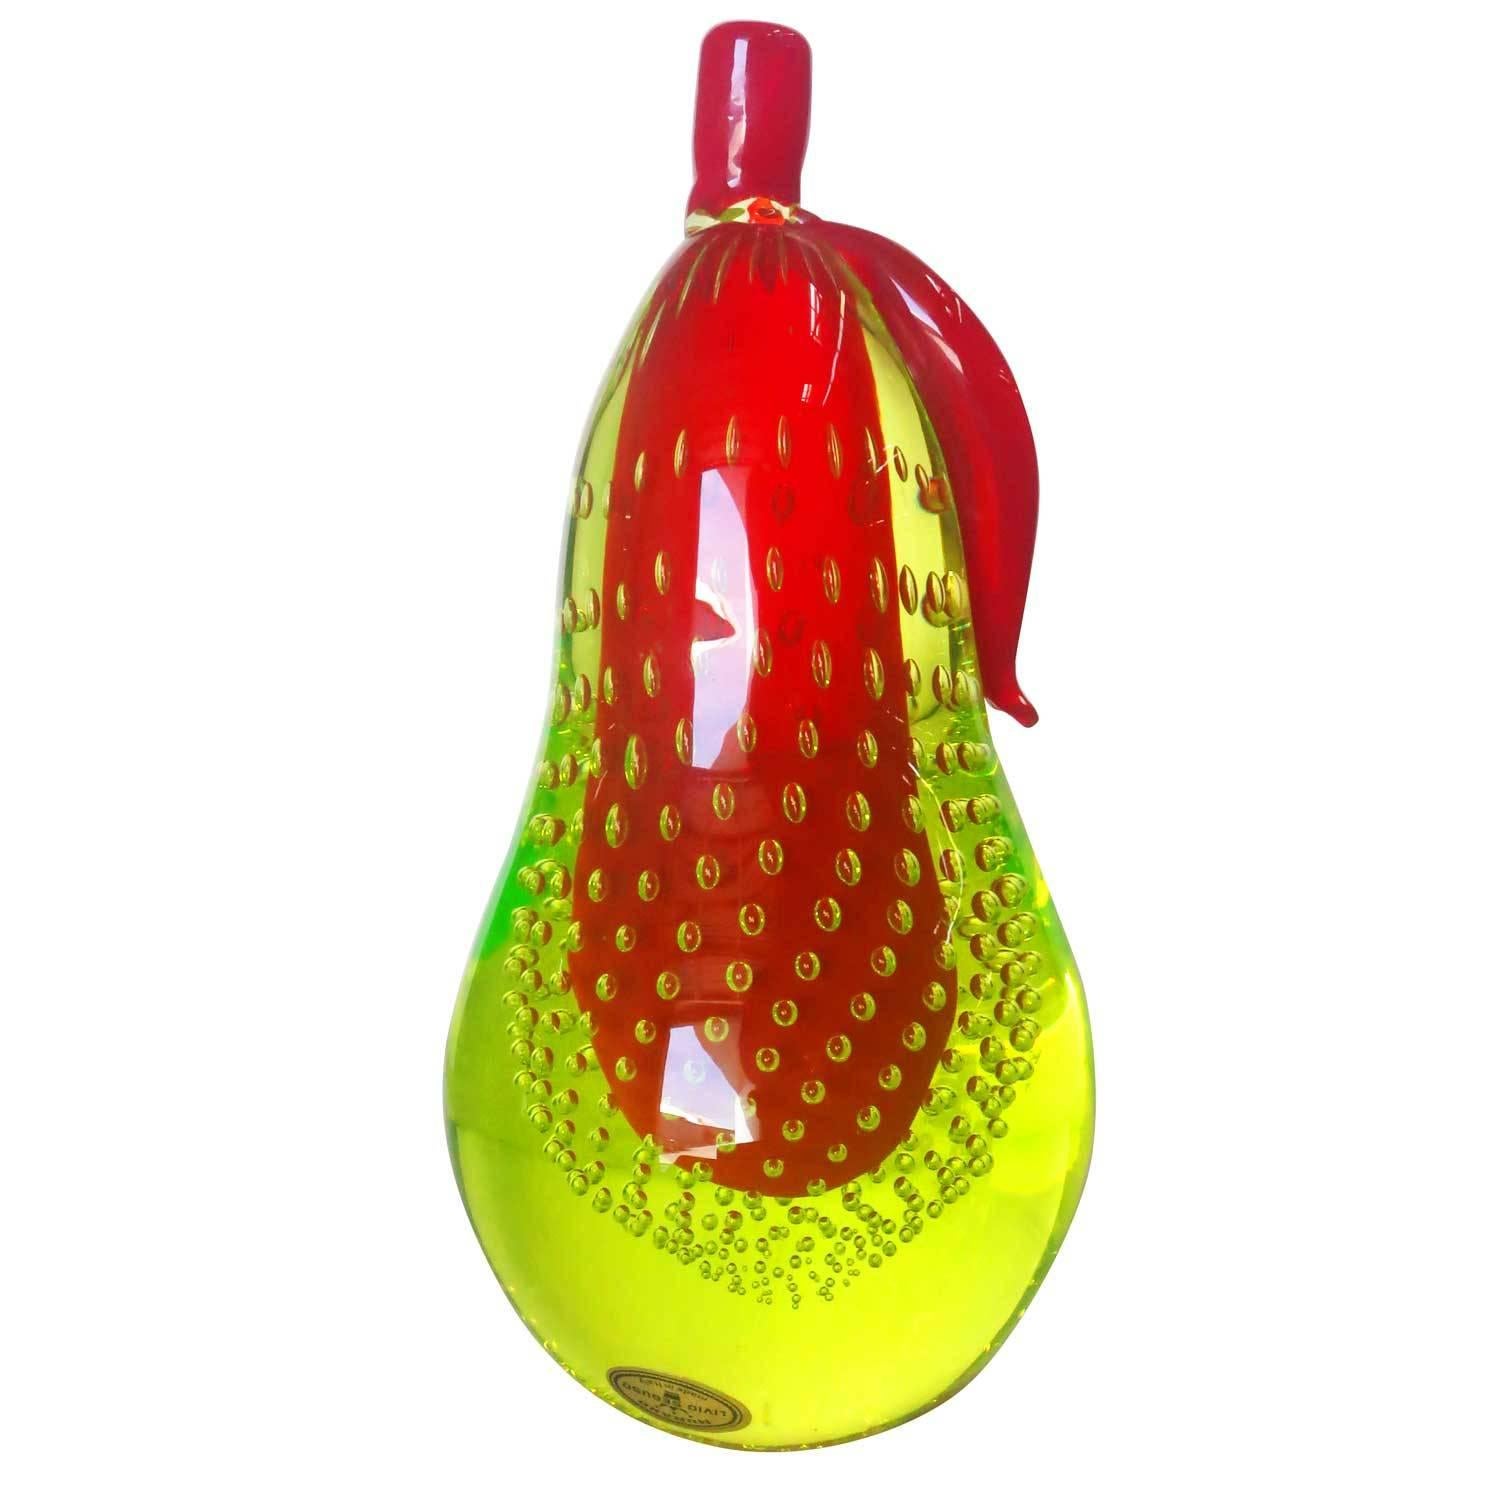 Beautiful Murano handblown art glass with red over green and controlled bubbles. The set features a pear with an apple, each with a polished side and bottom. They make great BookEnds

Signed Livio Seguso, circa 1960.

Italy, circa 1960.

Born in